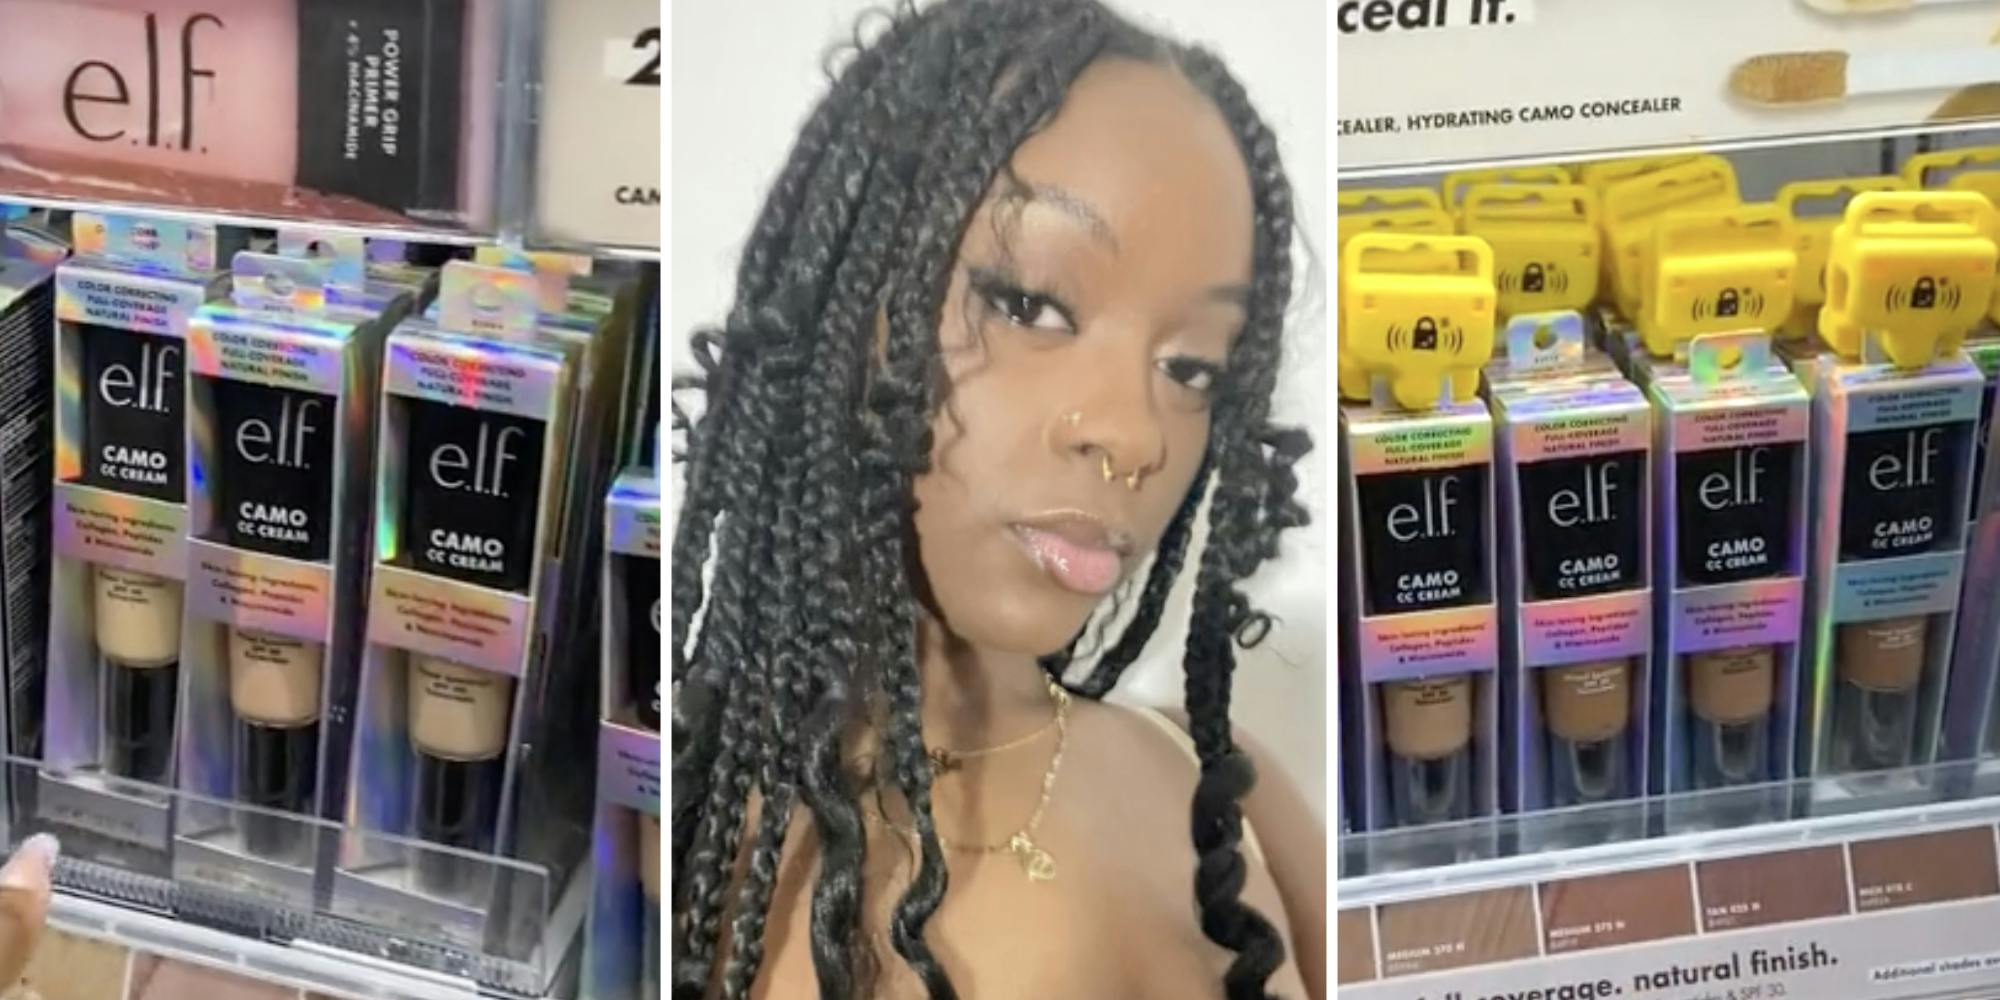 ‘This stereotype needs to stop!’: Walmart shopper notices that e.l.f. Cosmetics products are locked up depending on foundation shade